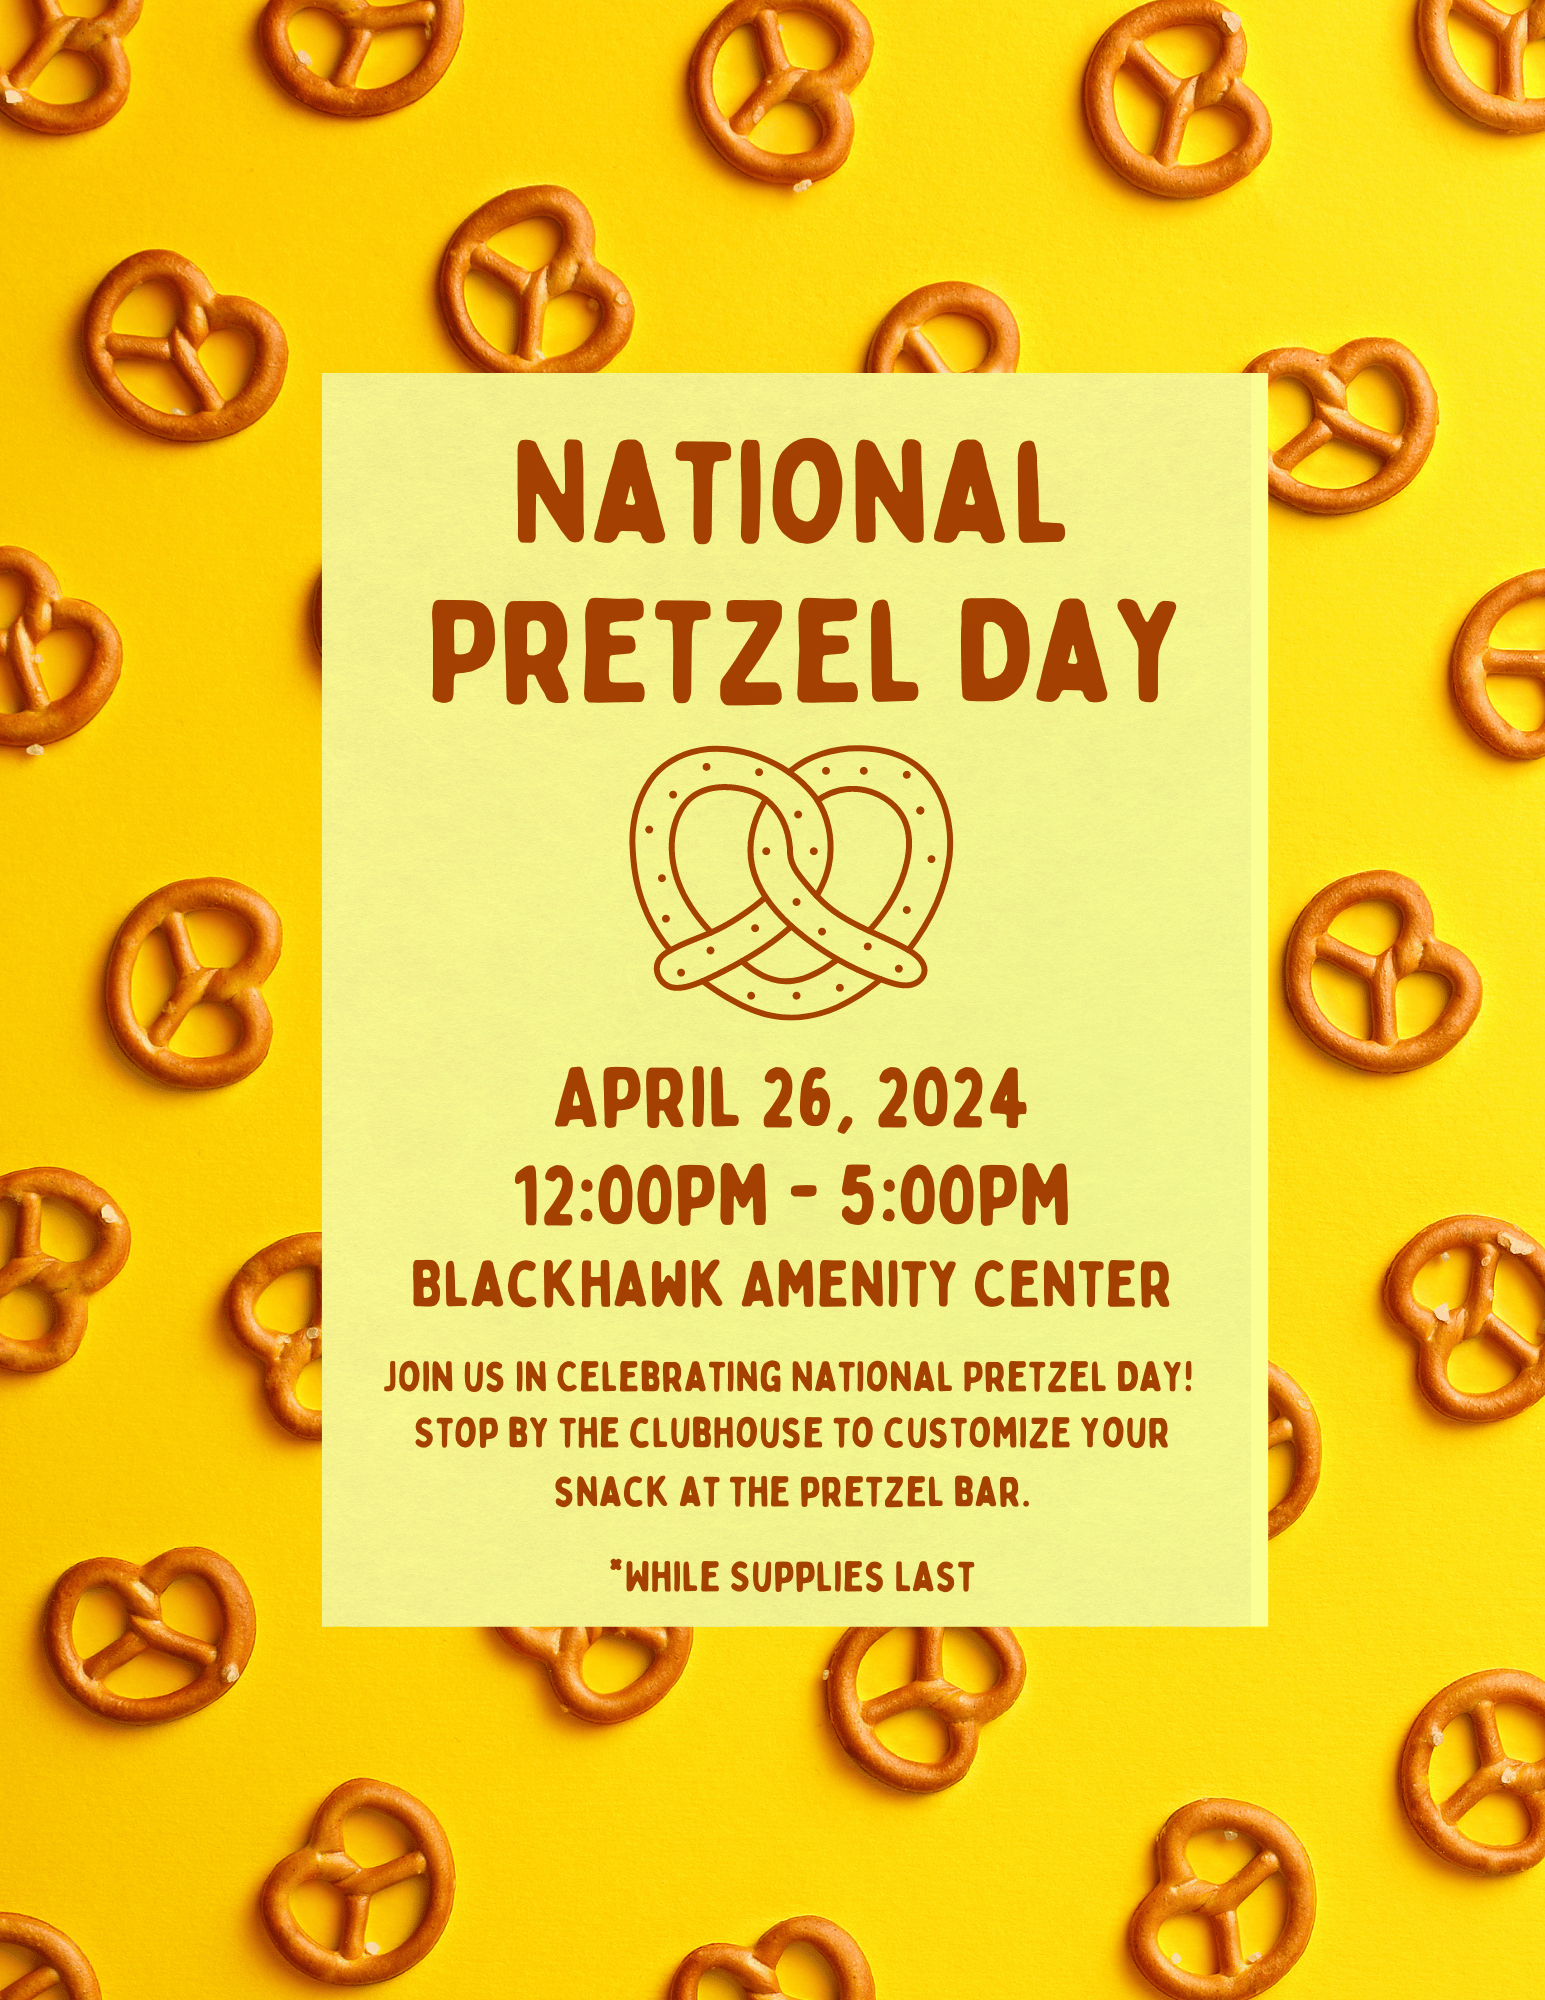 A vibrant flyer celebrating National Pretzel Day on April 26, 2024, with the event taking place from 12:00 pm to 5:00 pm at the Blackhawk Amenity Center. The background is bright yellow with multiple pretzels scattered around. A central tan square features the event details, including an invitation to 'Join us in celebrating National Pretzel Day! Stop by the clubhouse to customize your snack at the pretzel bar.' The text emphasizes the customization option and notes that the offer is valid 'while supplies last' with a double pretzel heart illustration above the date.